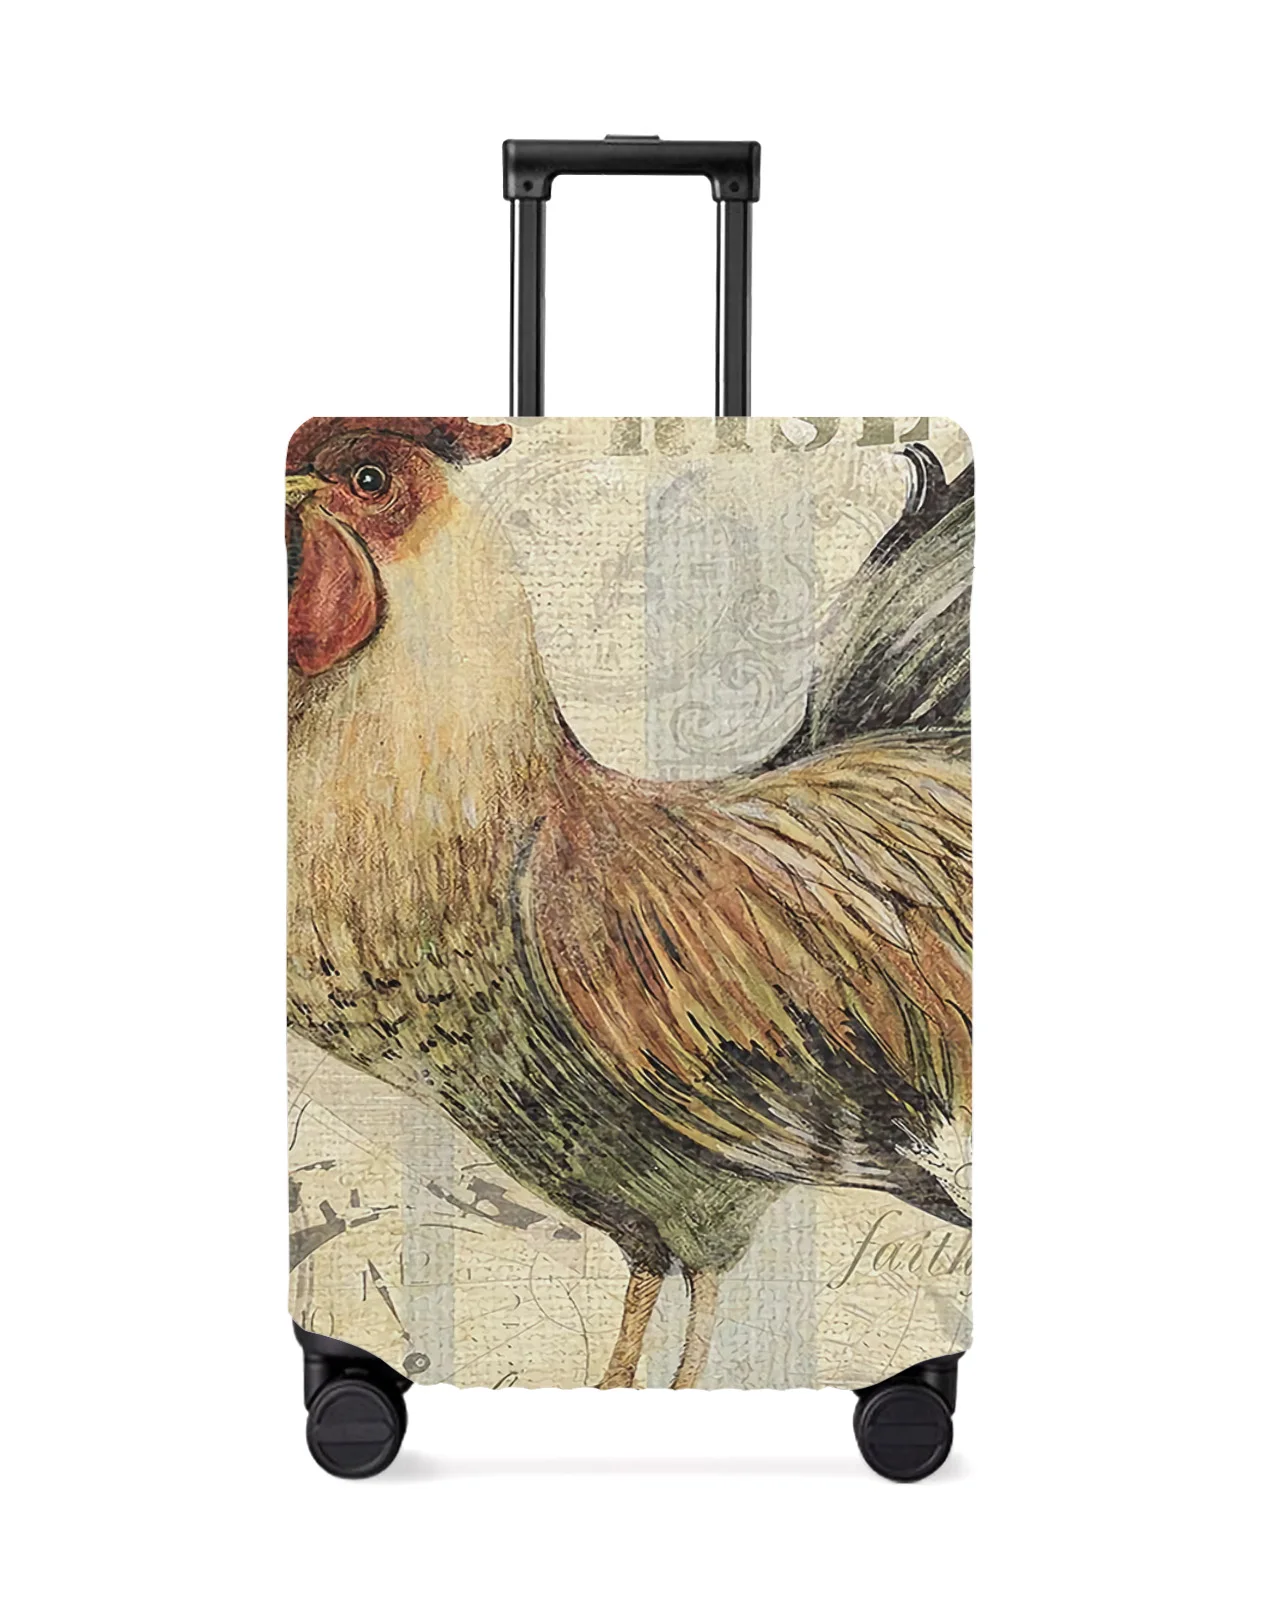 

Vintage Rooster Retro Farm Travel Luggage Cover Elastic Baggage Cover For 18-32 Inch Suitcase Case Dust Cover Travel Accessories